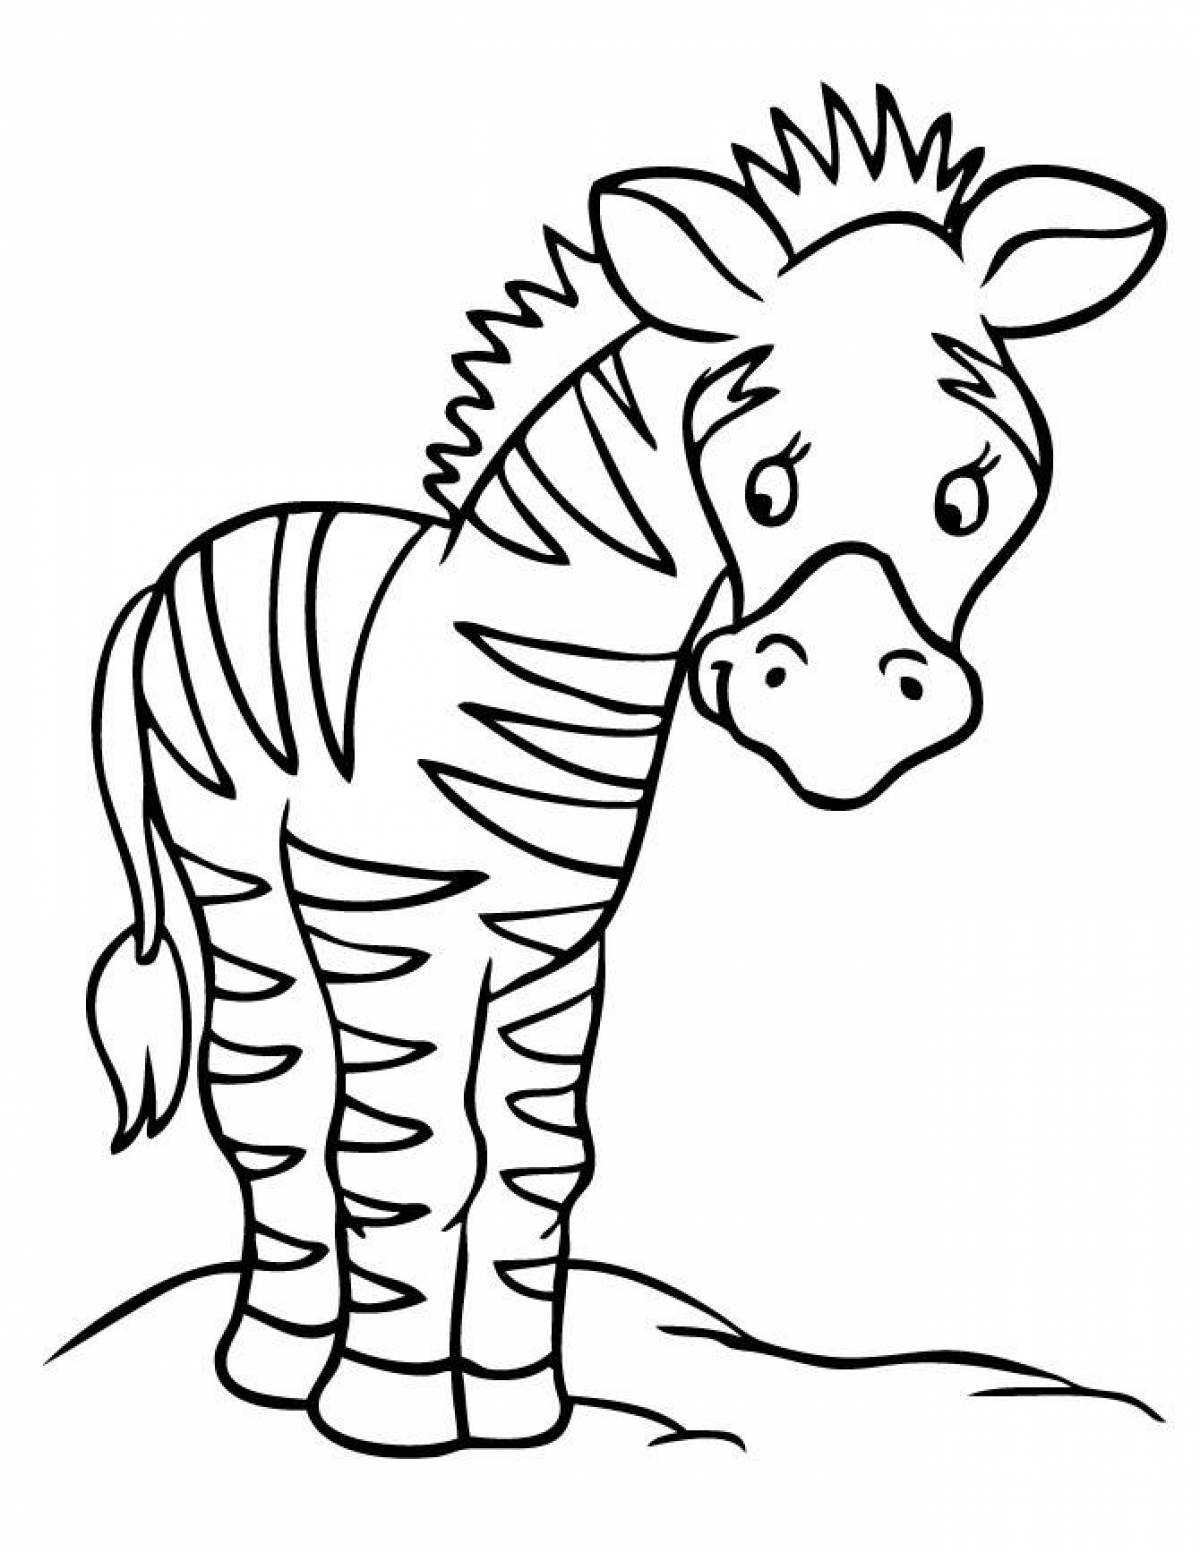 Playful zebra coloring page for kids